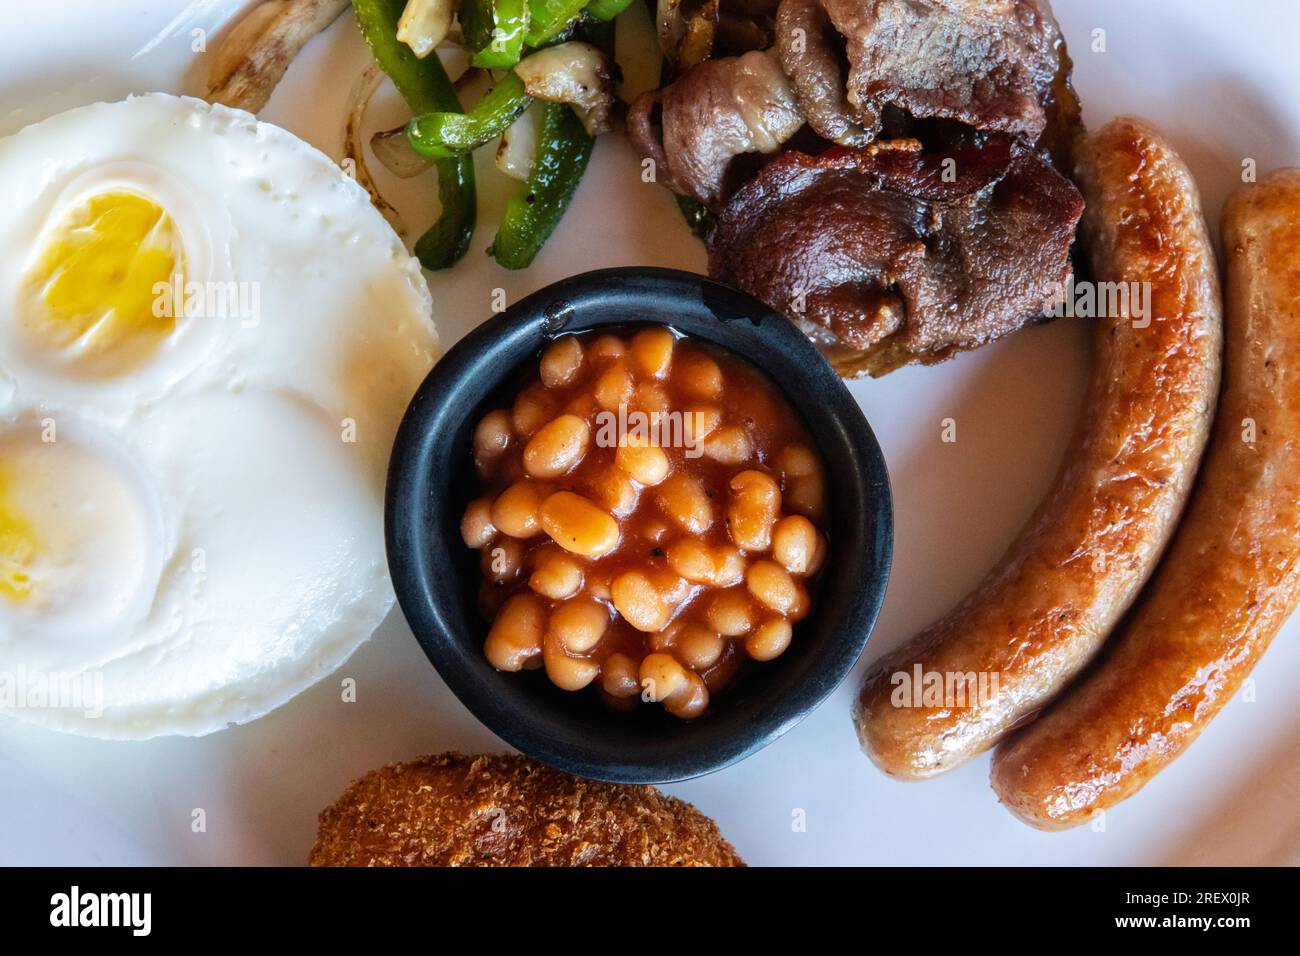 American Breakfast with Eggs, Sausages, Bacon, Beans, Hash Brown Potatoes and Sauted Vegetables Stock Photo